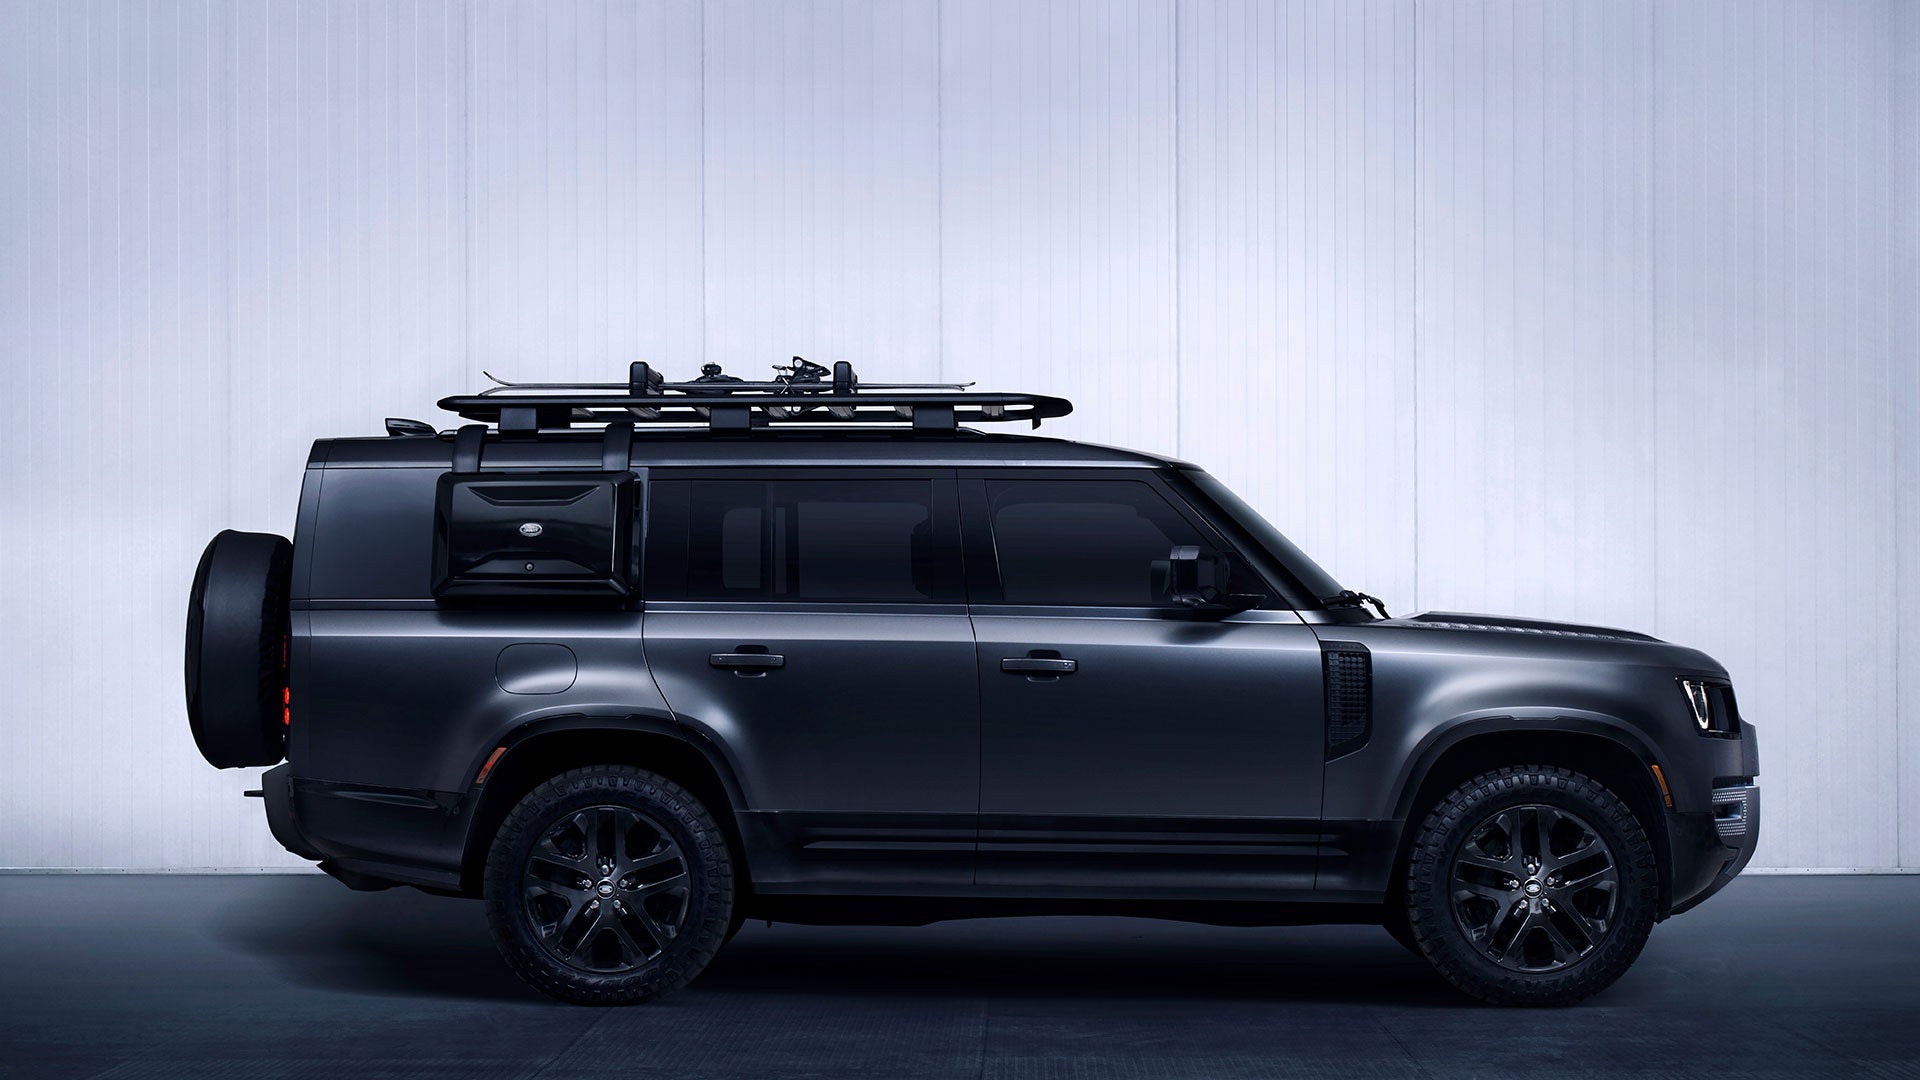 A dark gray Range Rover Defender parked in front of white wall with roof rack on top